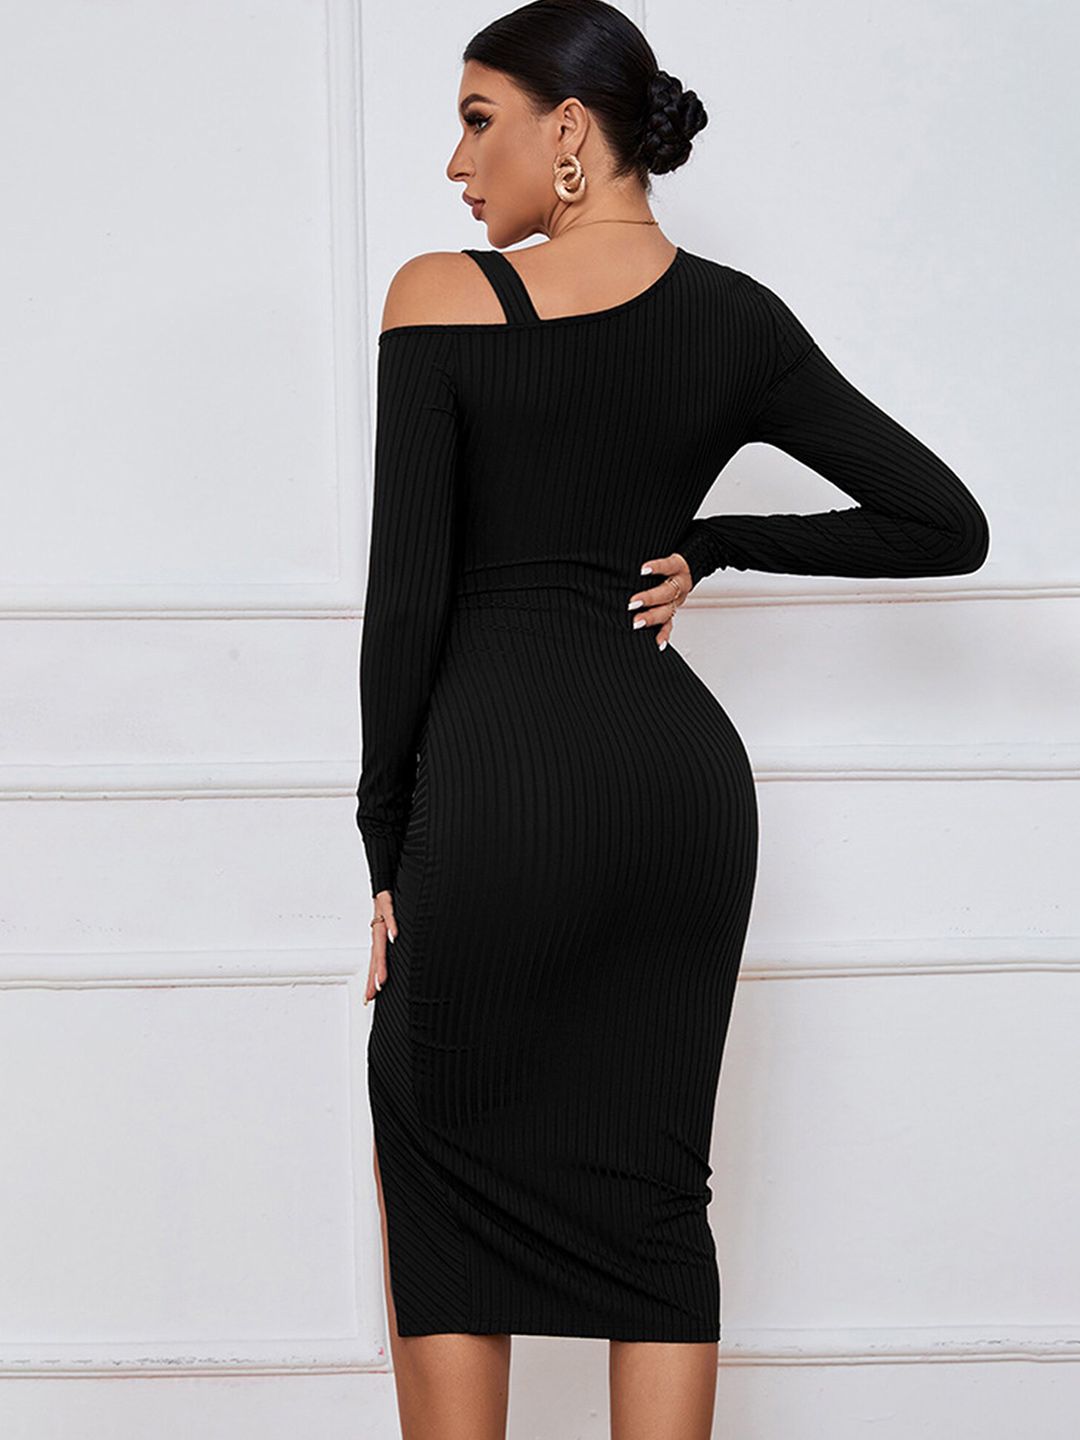 Buy StyleCast StyleCast Black One Shoulder Puff Sleeves A-Line Mini Dress  at Redfynd